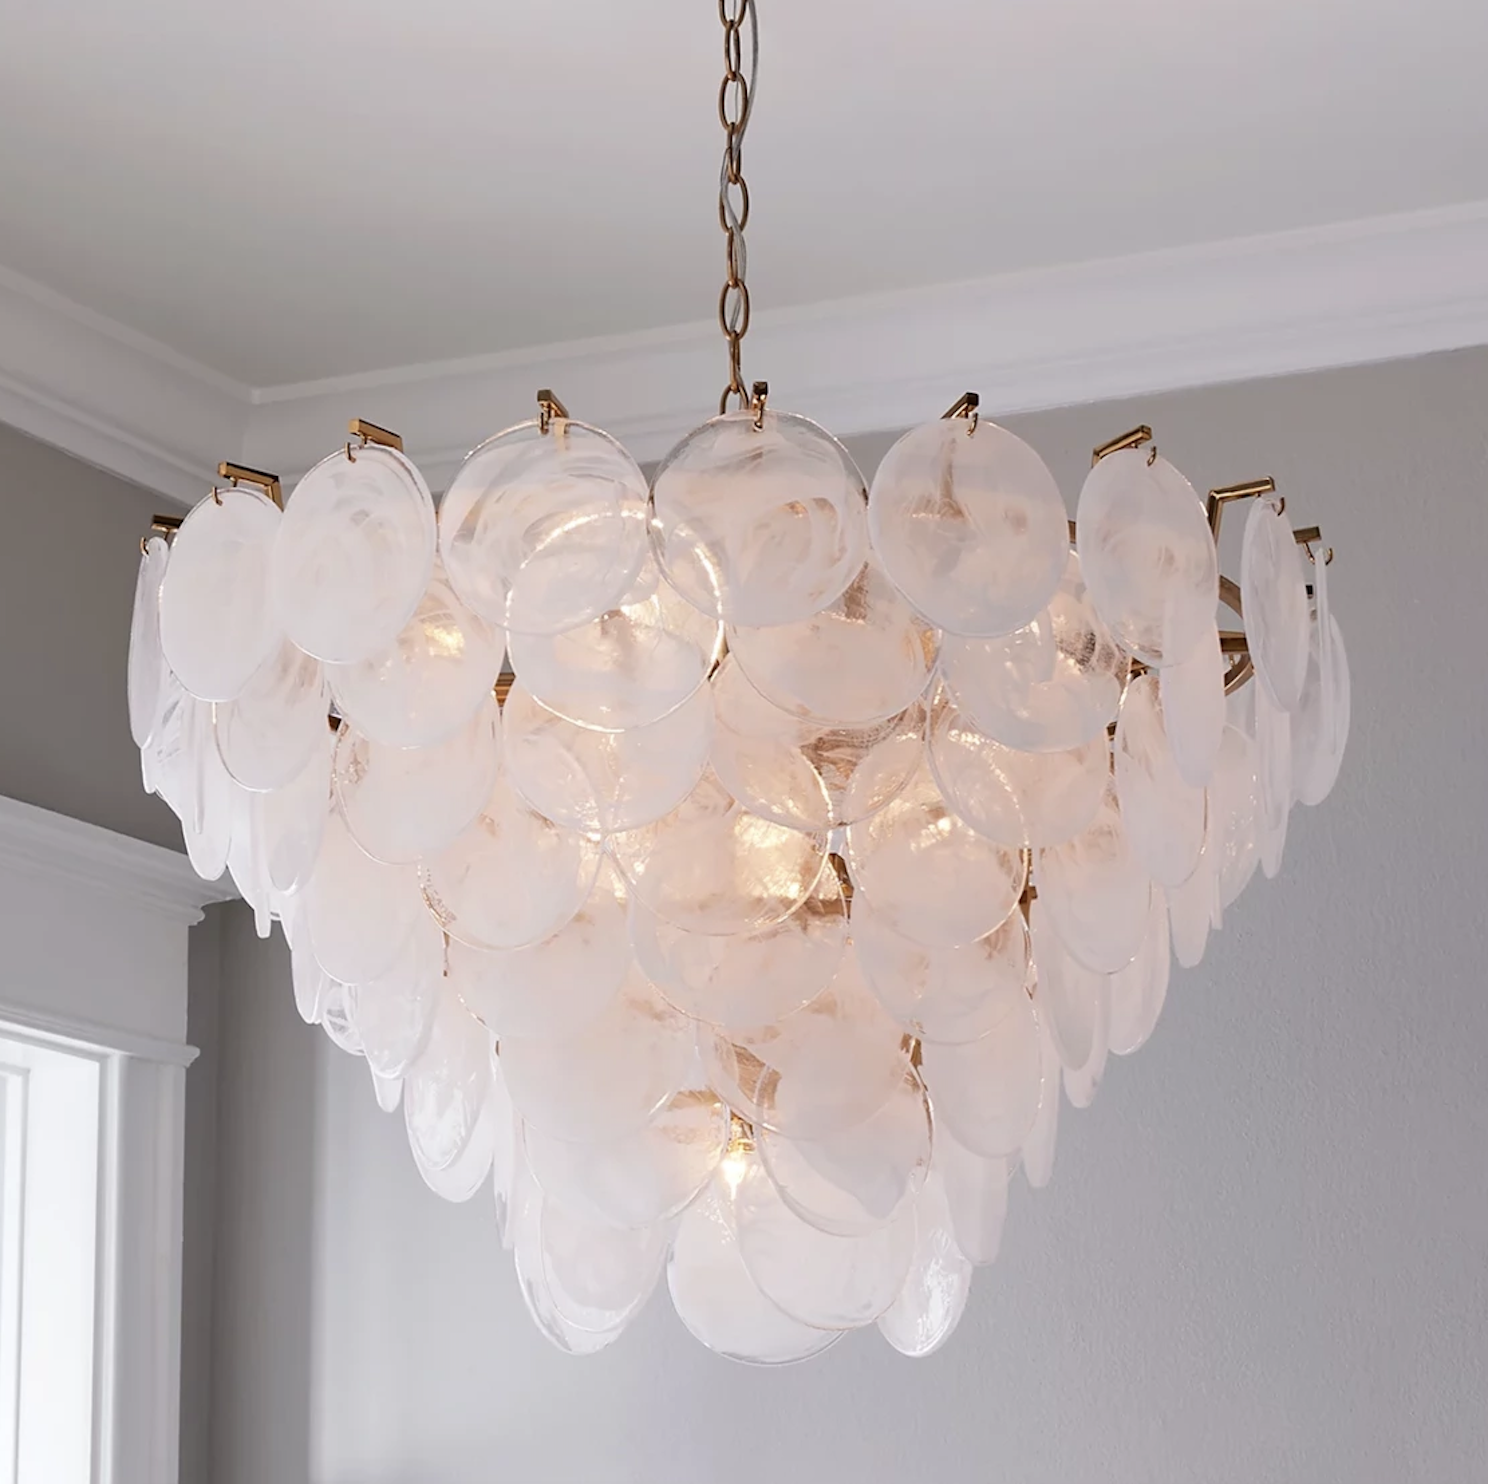 Bali Shell Chandelier - $1,956 - Shades of Light 